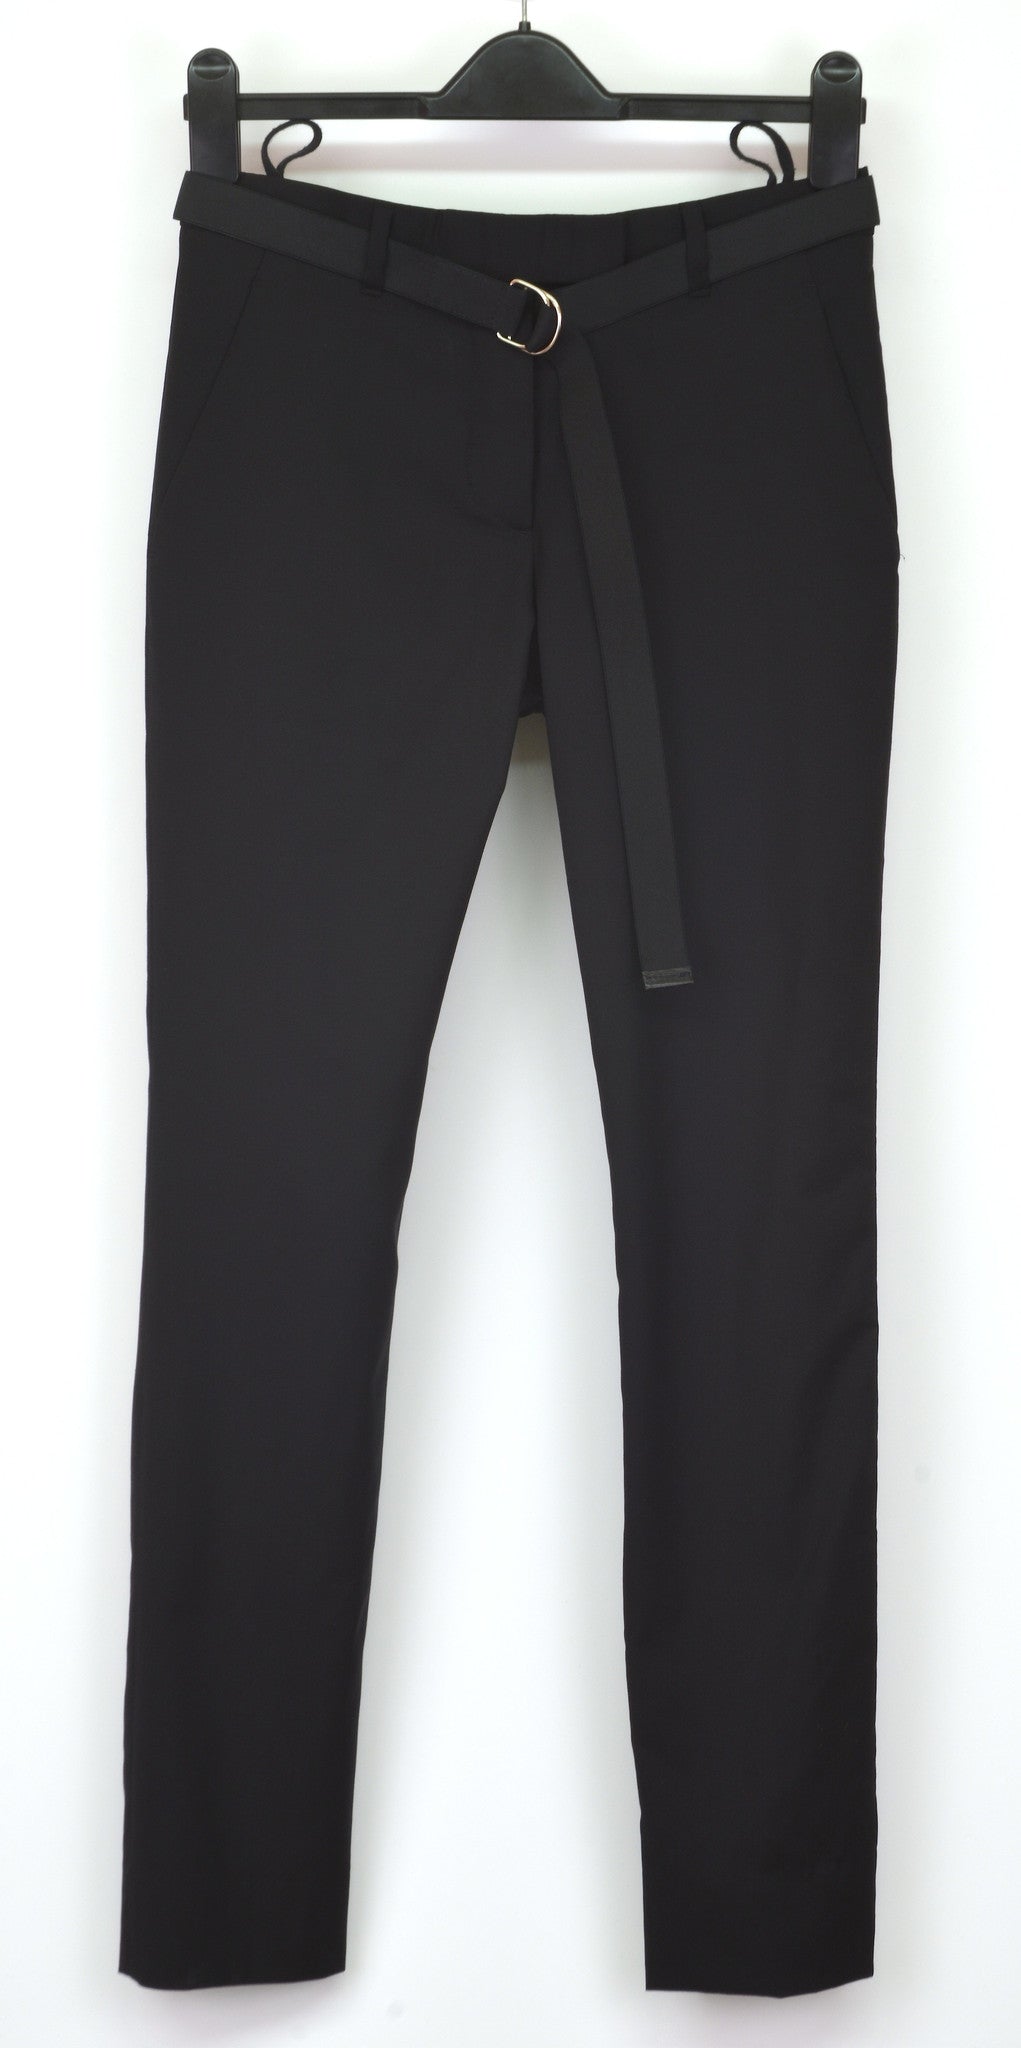 Helmut Lang 2001 Wool/Silk Tailored Trousers with Elastic Bondage